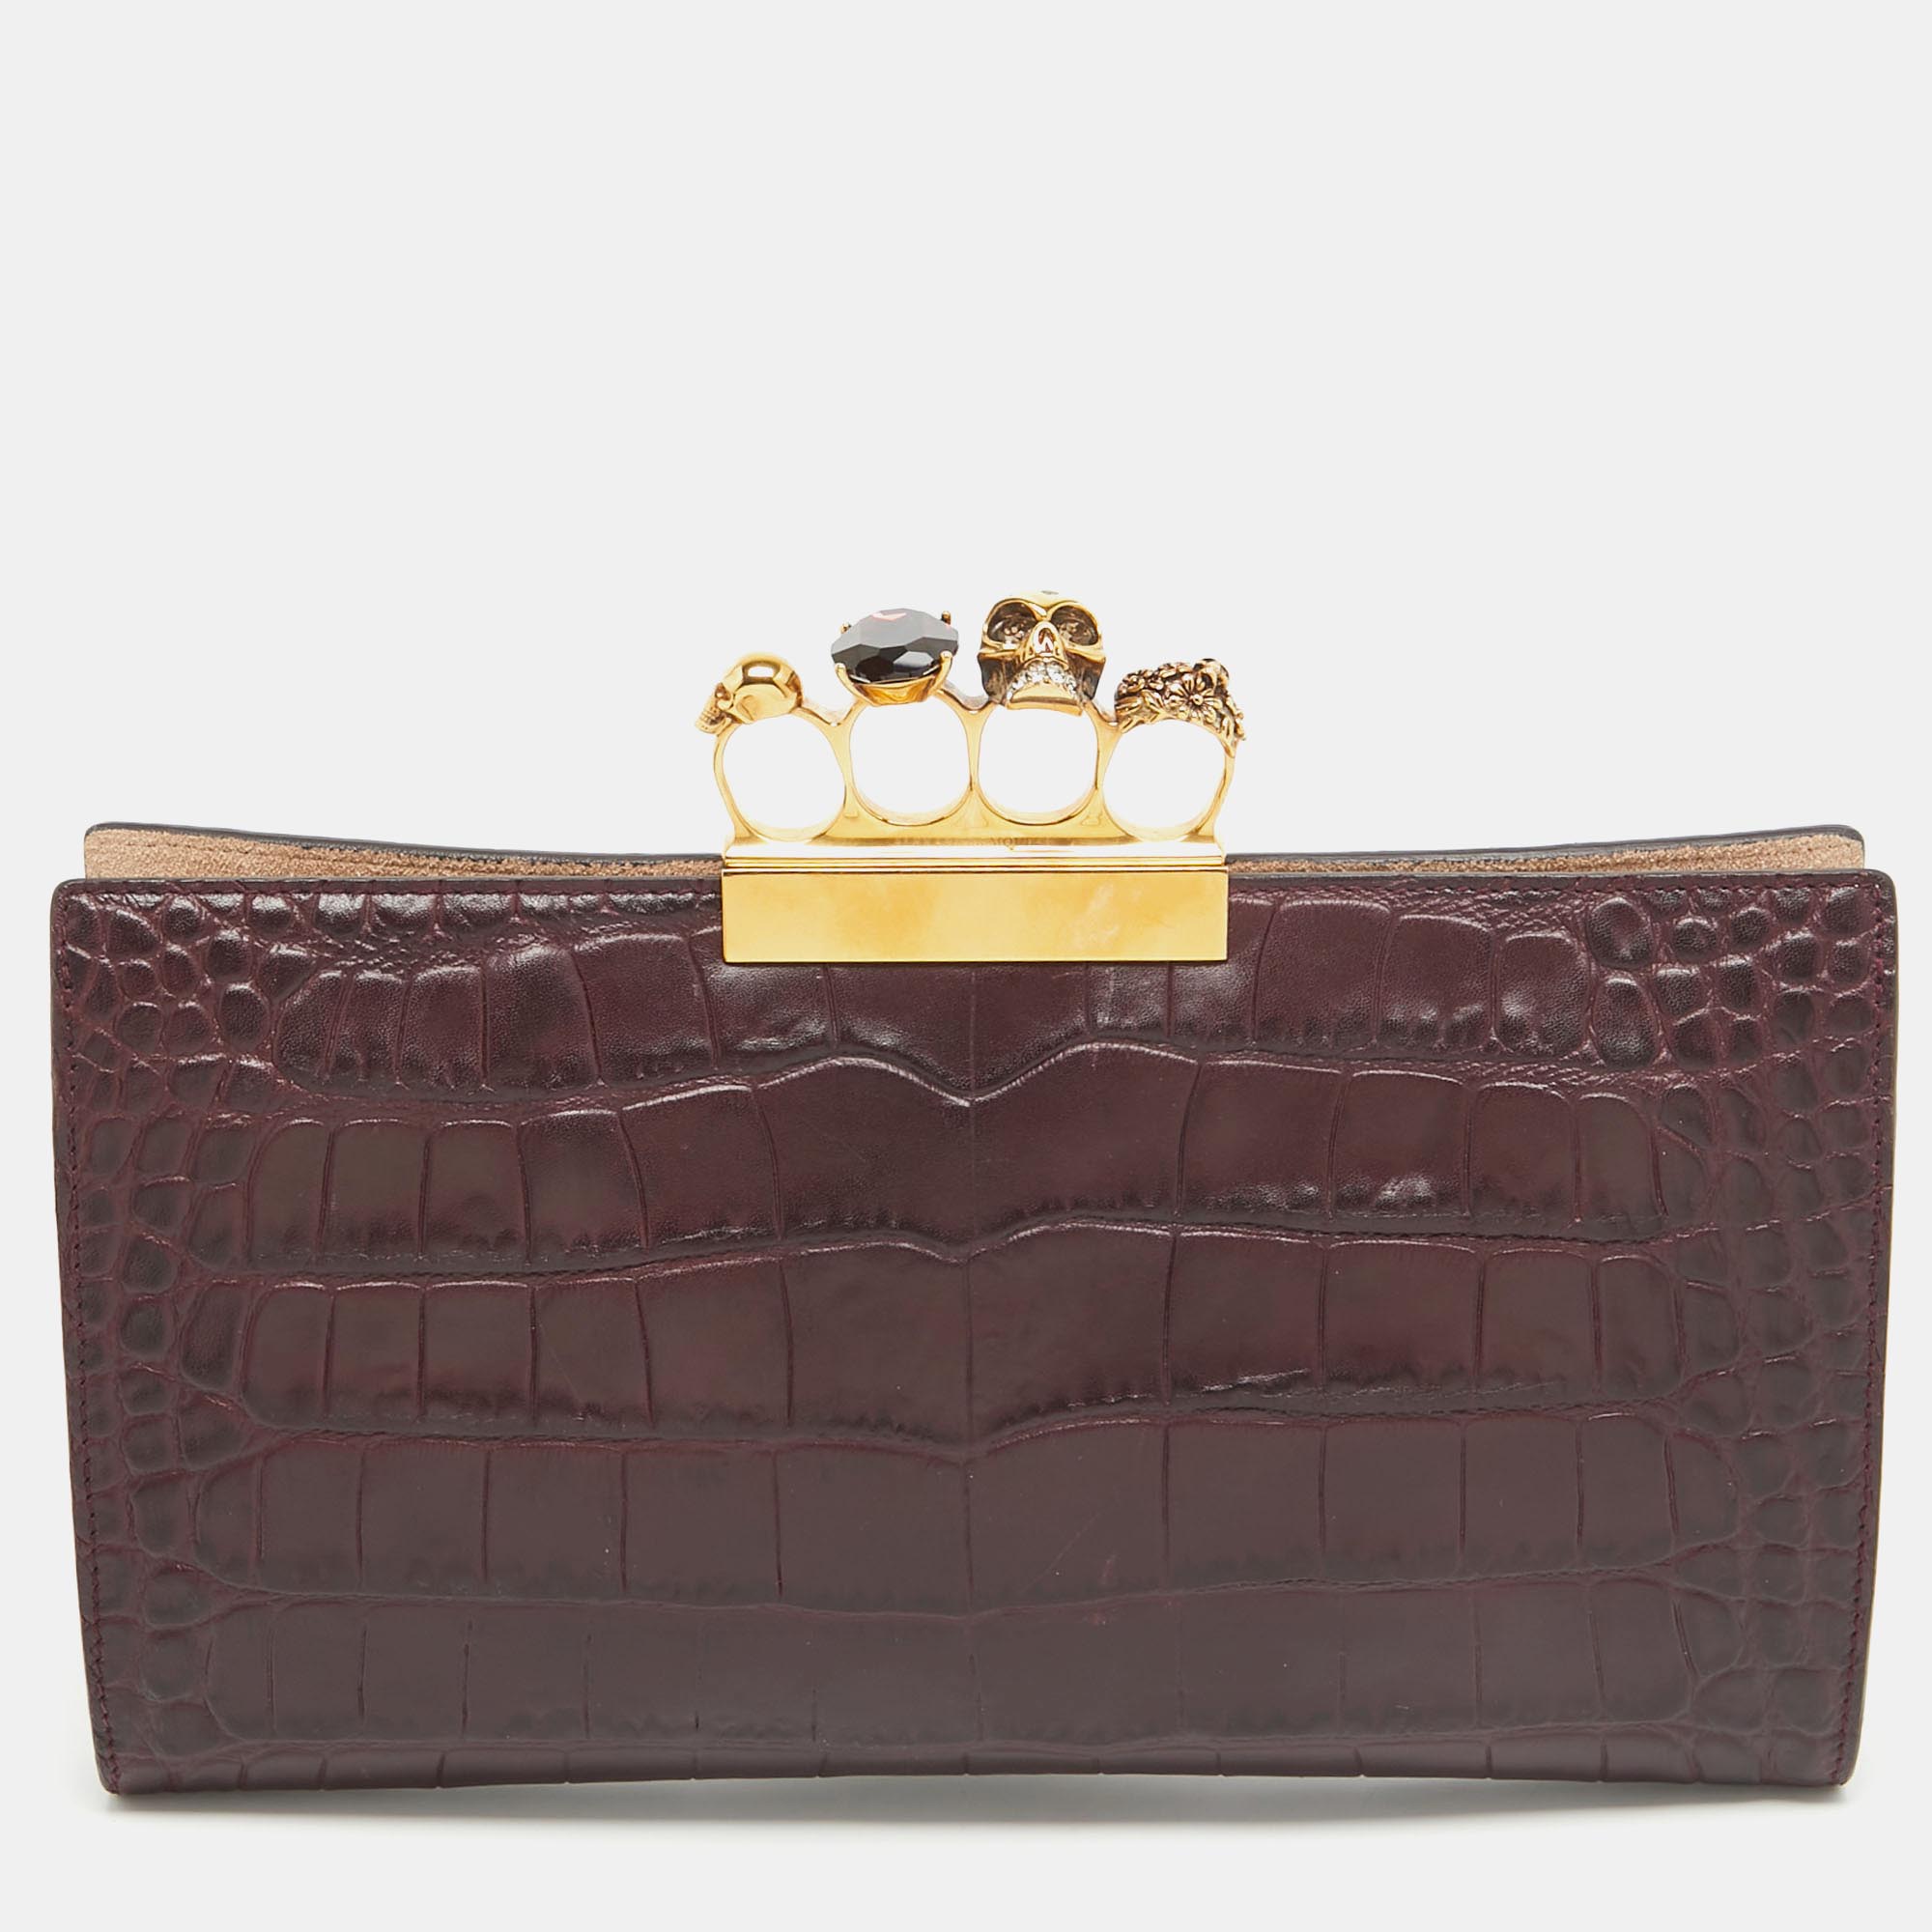 Pre-owned Alexander Mcqueen Burgundy Croc Embossed Leather The Knuckle Clutch